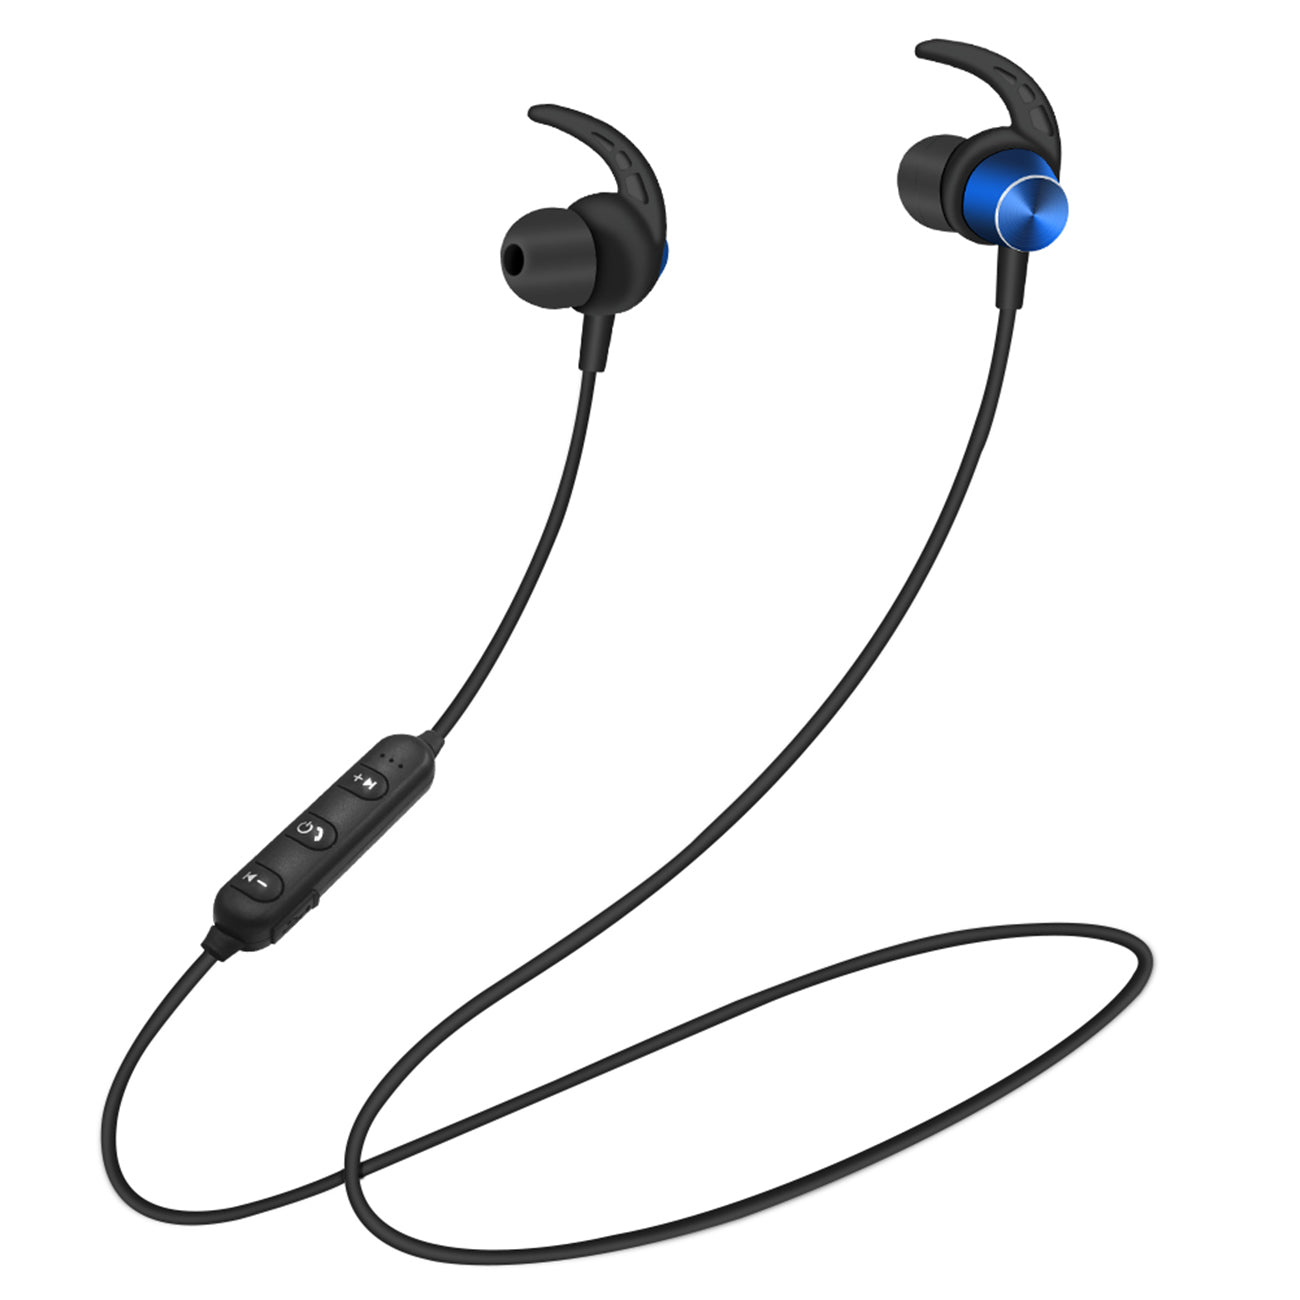 Magnetic Bluetooth Earphone Headset With Mic In Navy